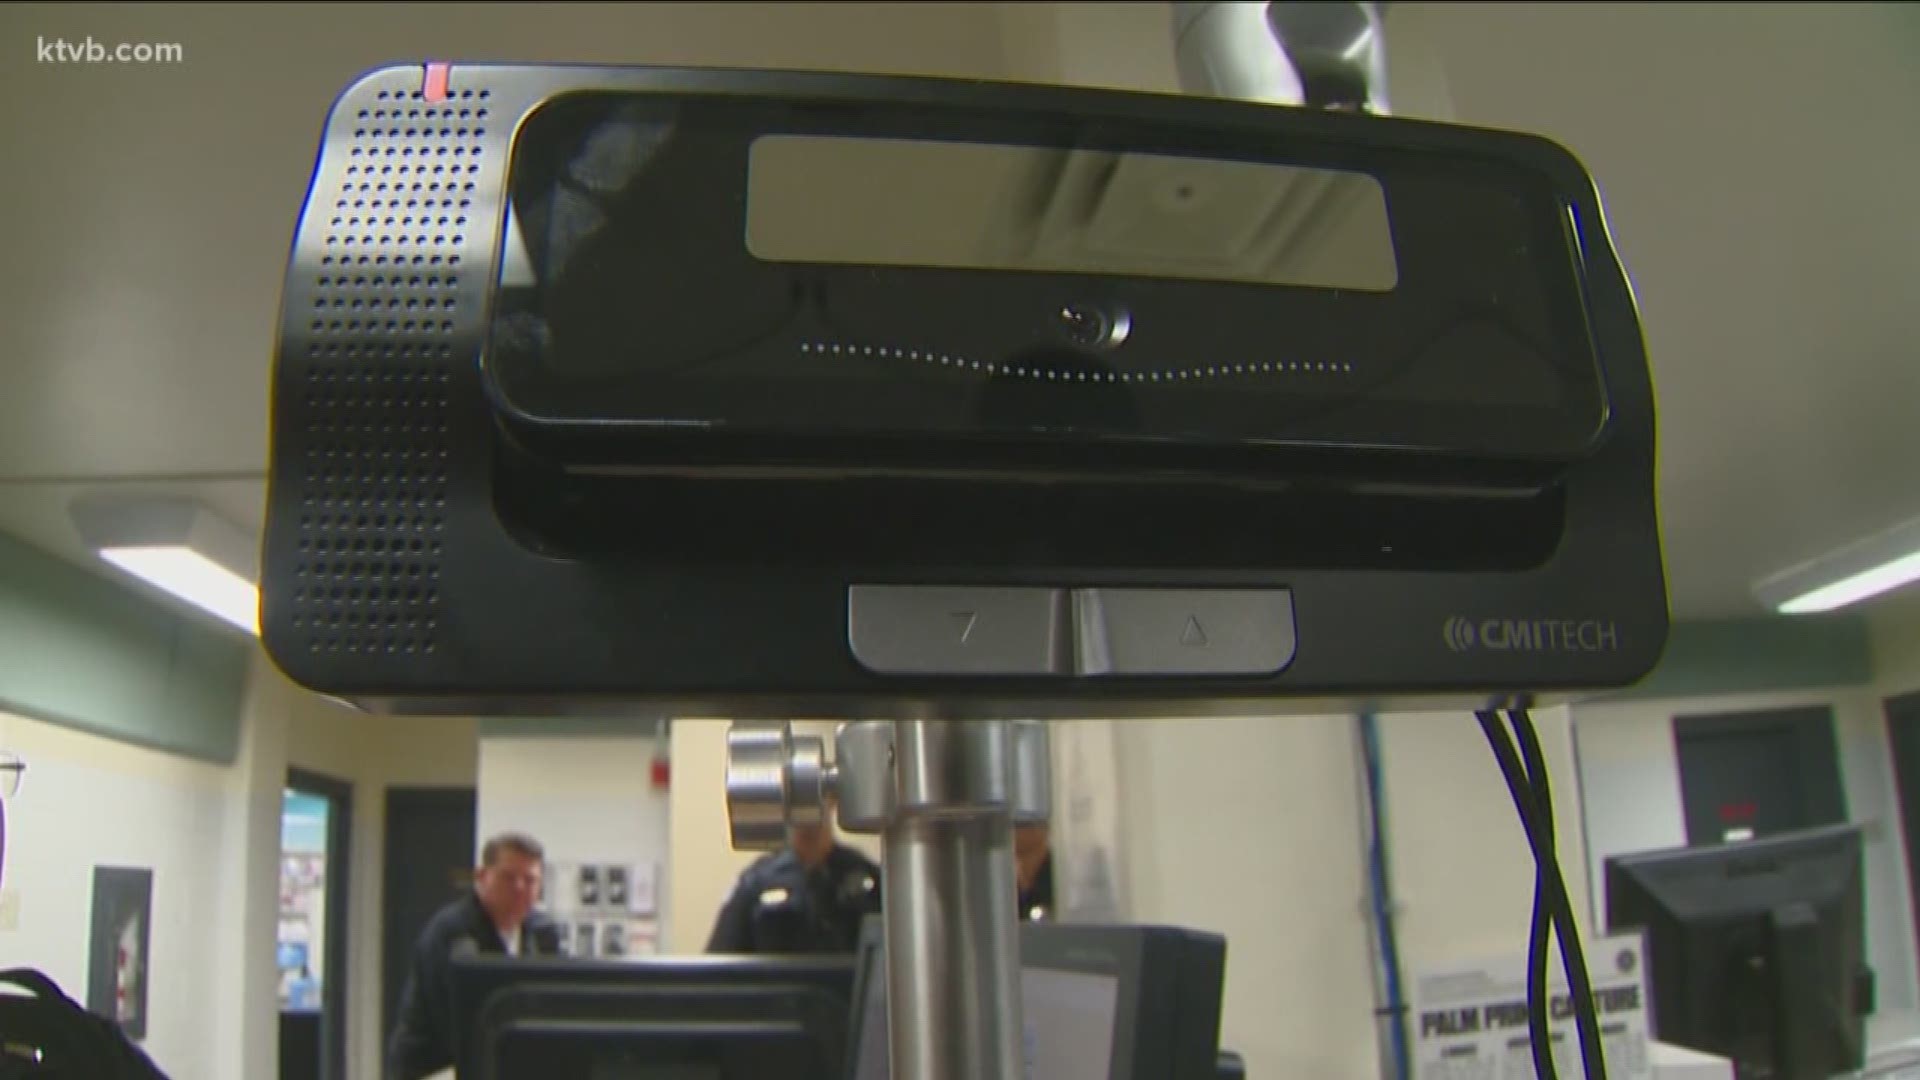 The sheriff's office is now using iris recognition technology to identify inmates.